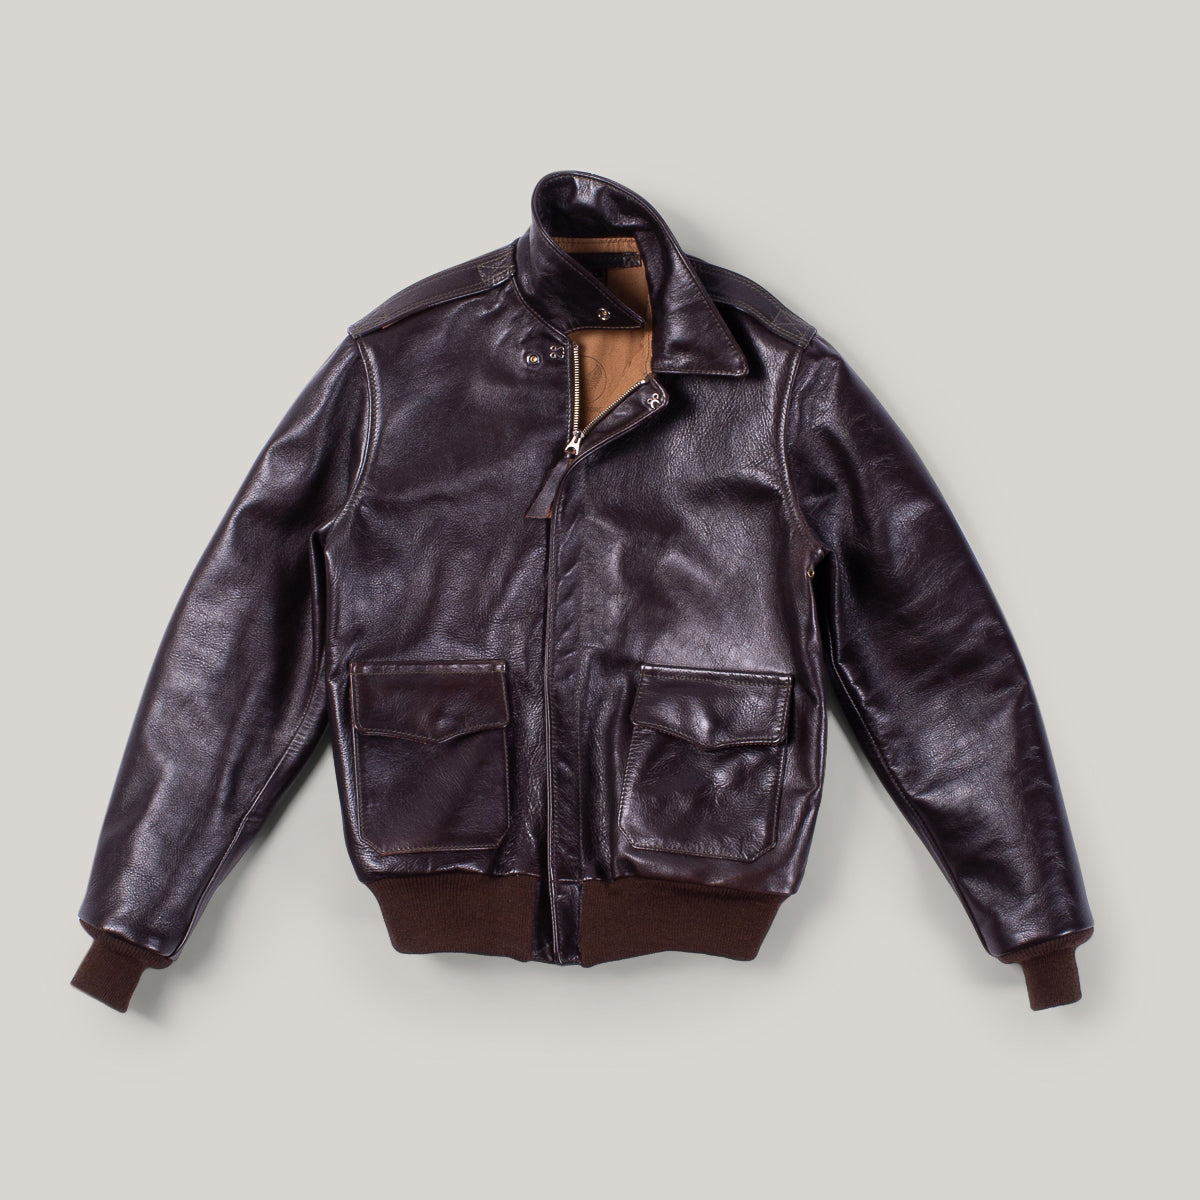 AERO LEATHER A2 BRONCO - SEAL HORSEHIDE/MID BROWN  KNIT